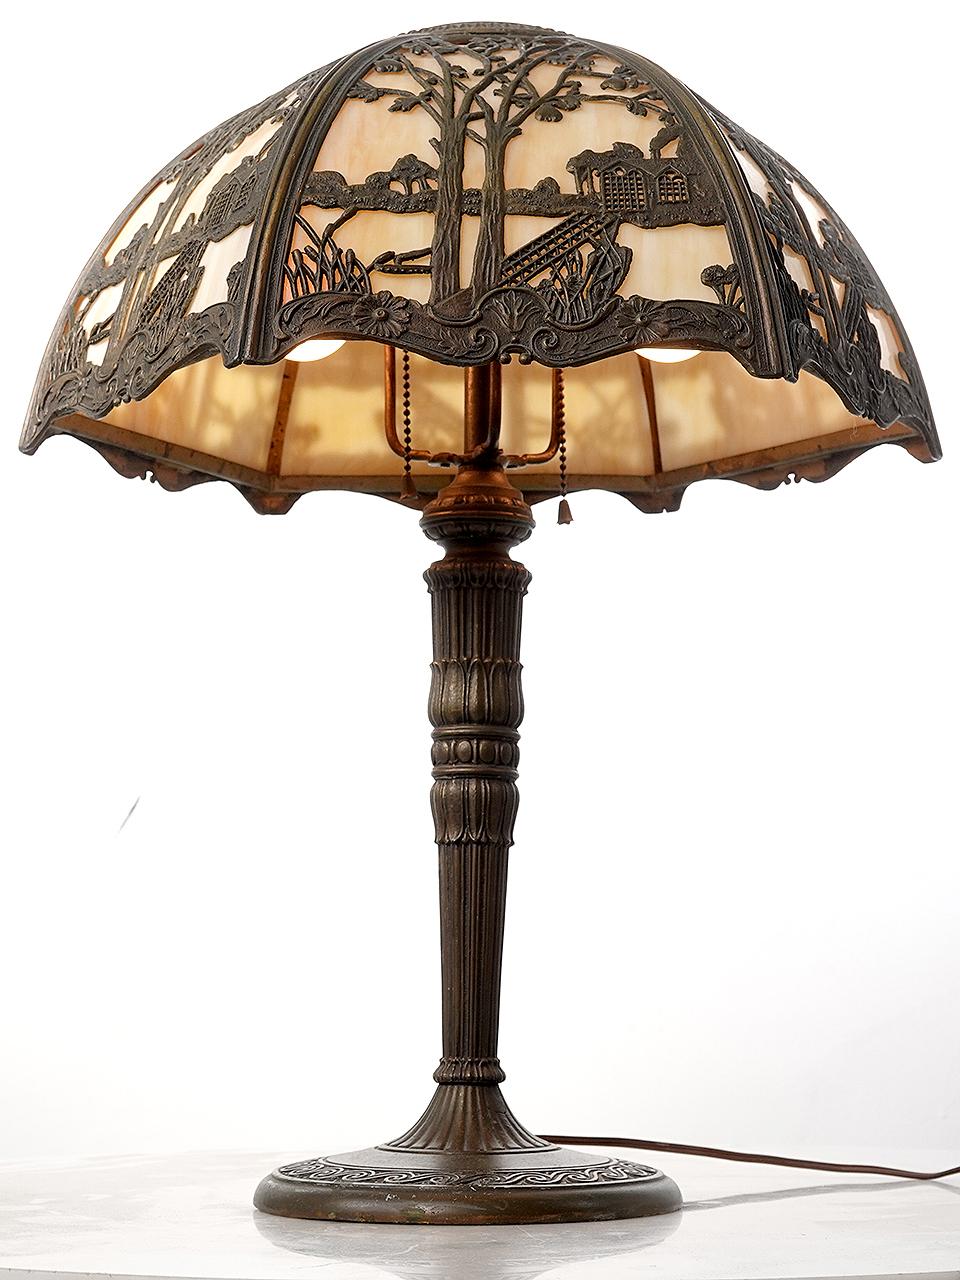 This is a nicely designed Arts and Crafts table lamp. It has a curved shade with 6 elaborate landscape themed cast filigree panels. Each slump glass (curved) panel features a cream -  amber variegated glass and is lit by two E26 bulbs. All the cast